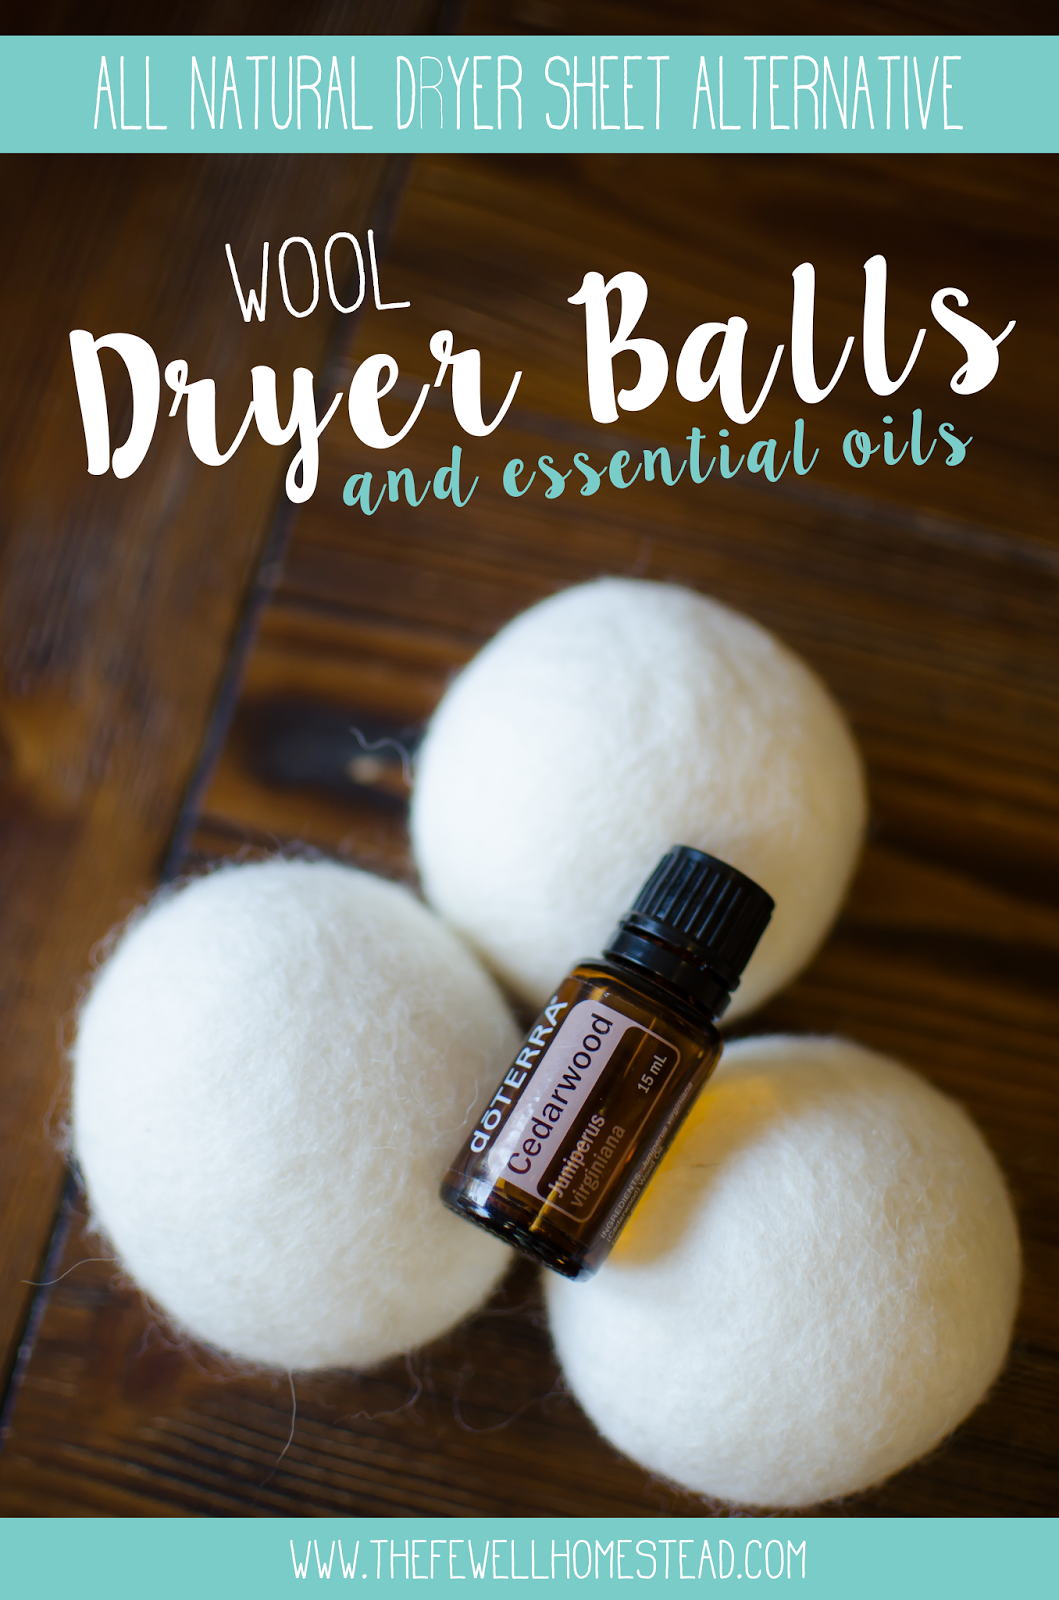 All Natural Wool Dryer Balls and Essential Oils - Amy K Fewell